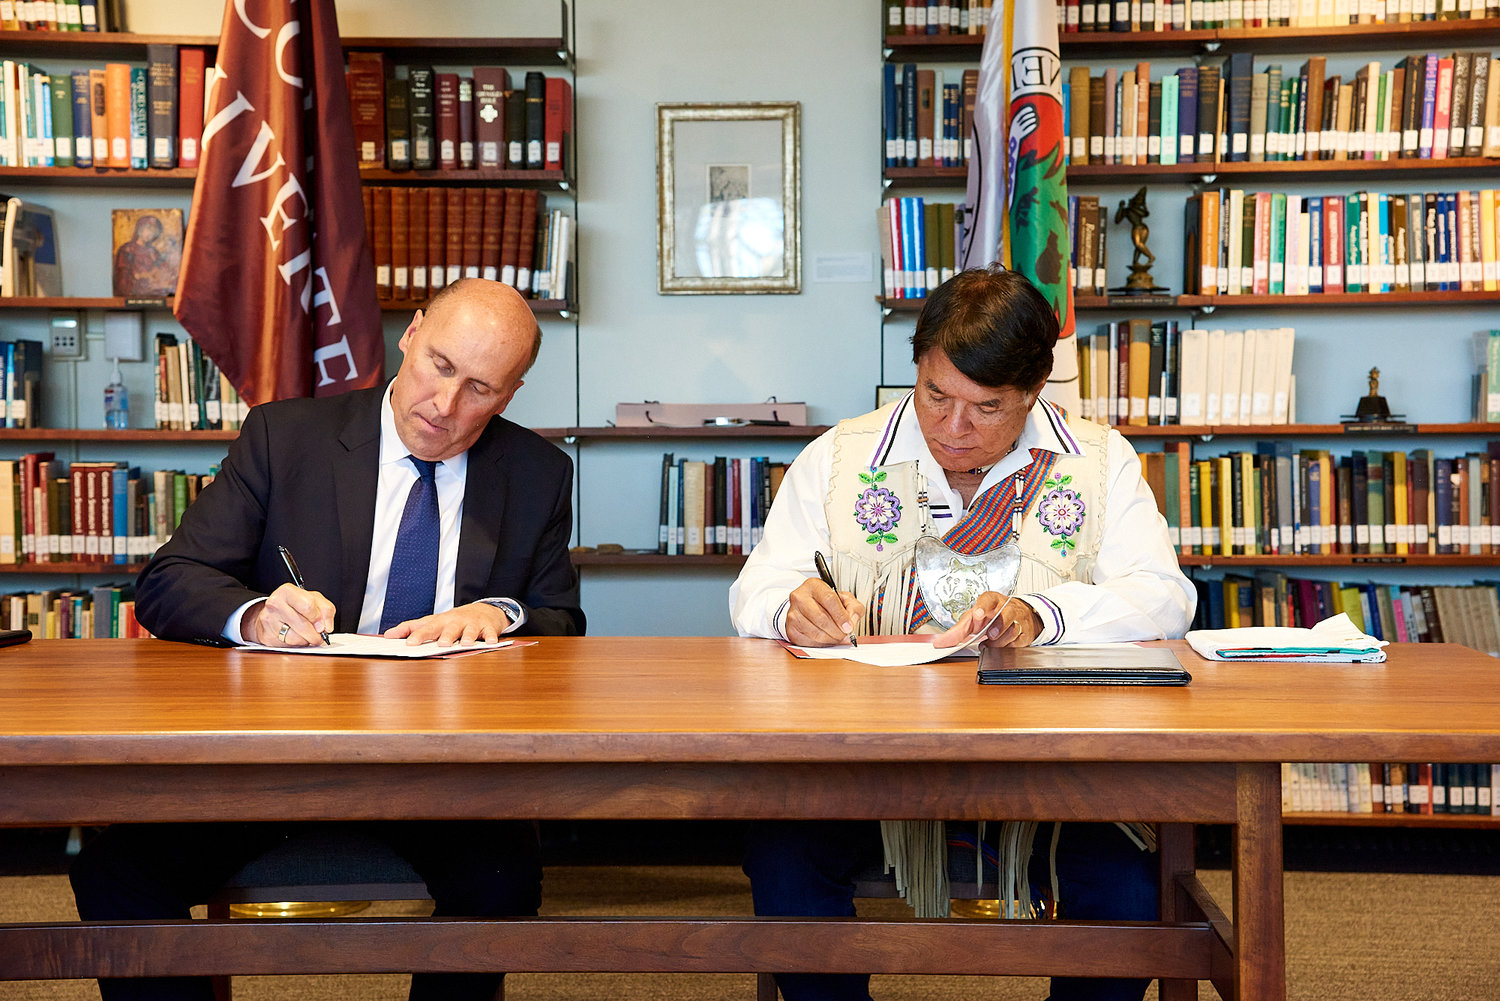 Colgate University President Brian Casey, left, and Oneida Indian Nation Representative Ray Halbritter sign proclamations for the repatriation of the Oneida Nation’s belongings from the university’s Longyear Museum of Cultural Anthropology on Wednesday.